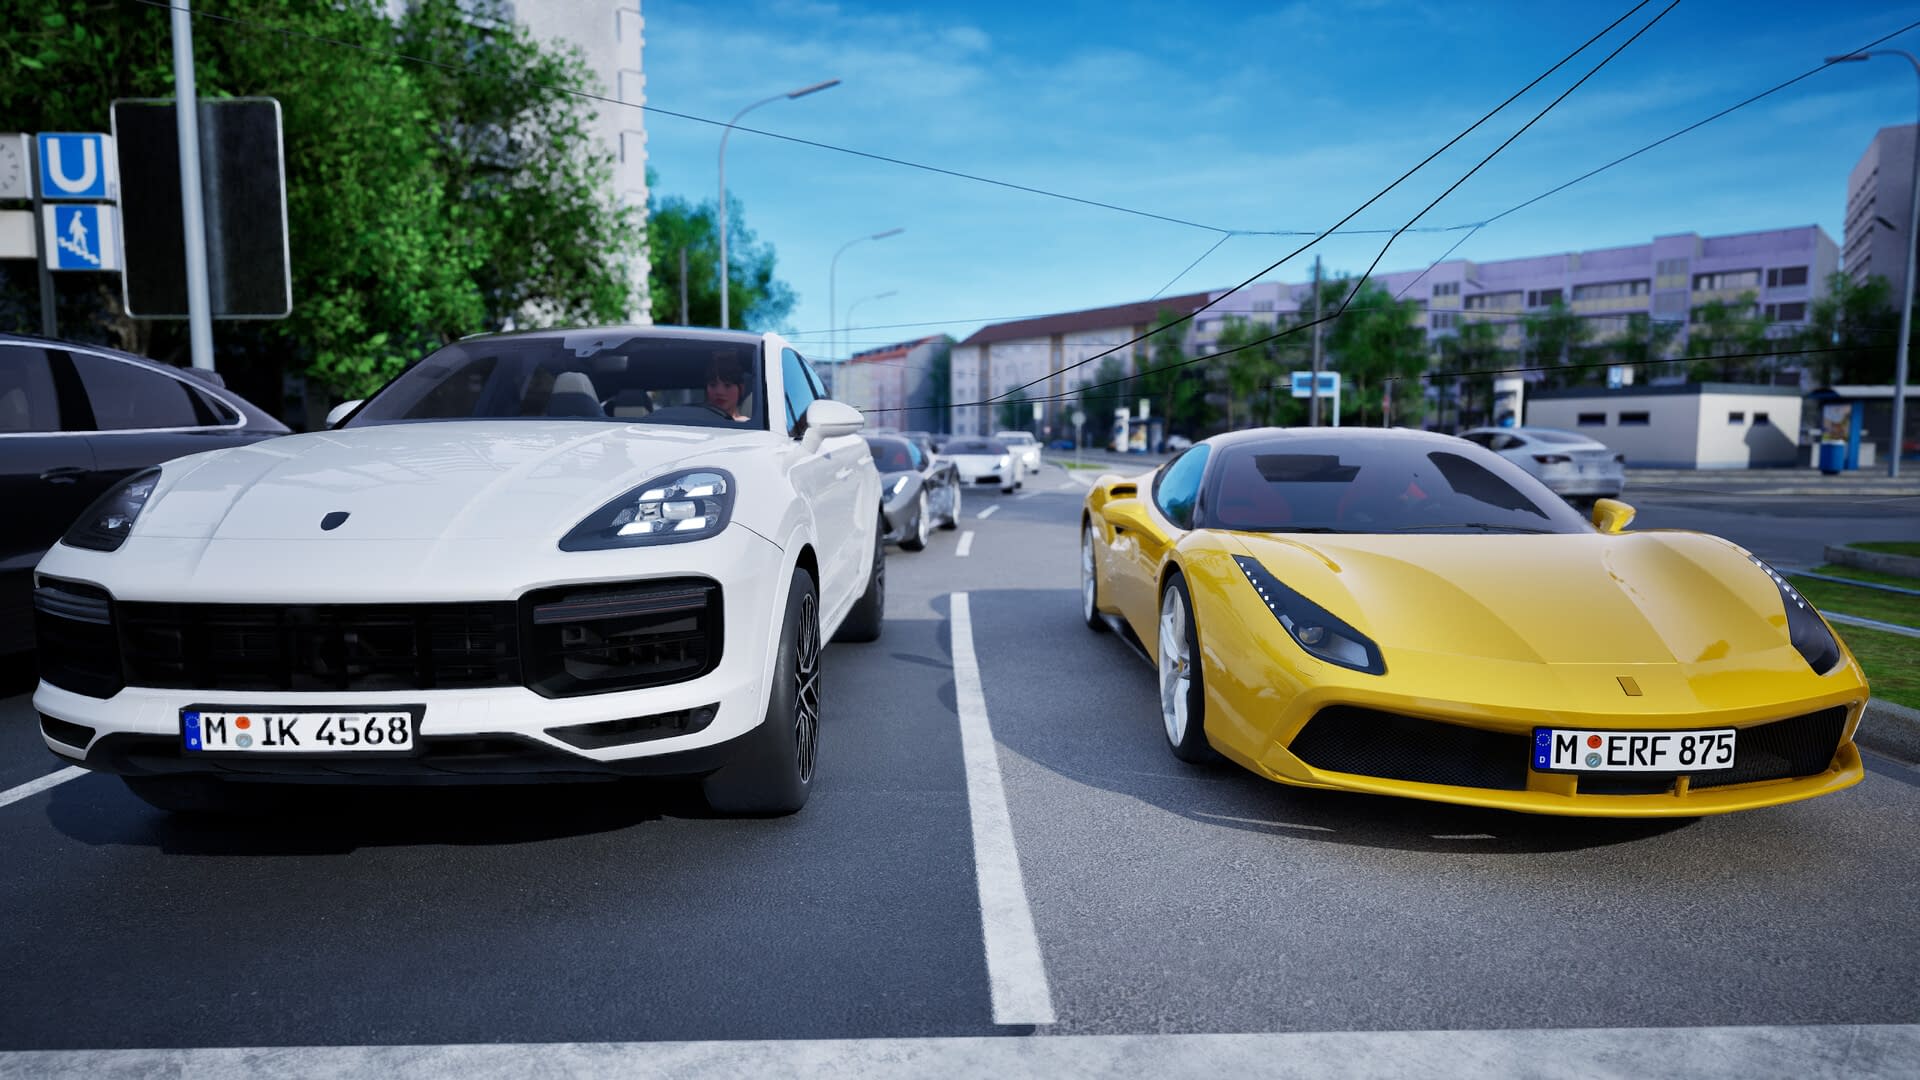 Realistic car riding simulation Citydriver comes soon: Here all details